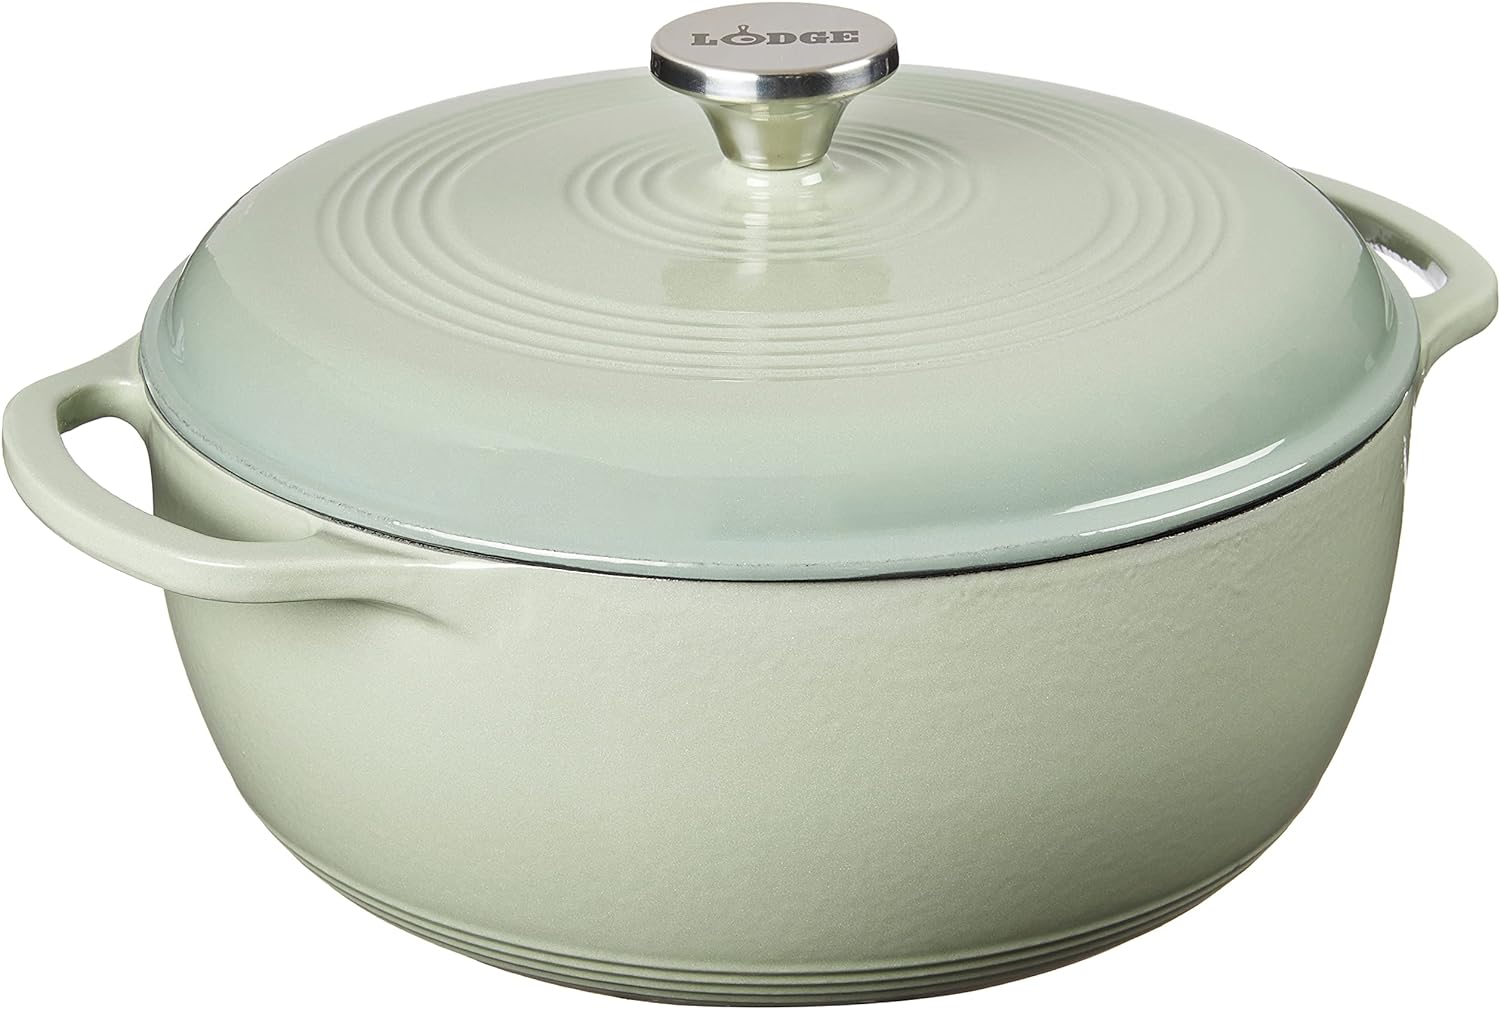 Lodge 6 Quart Enameled Cast Iron Dutch Oven with Lid – Dual Handles – Oven Safe up to 500° F or on Stovetop – Use to Marinate, Cook, Bake, Refrigerate and Serve – Desert Sage